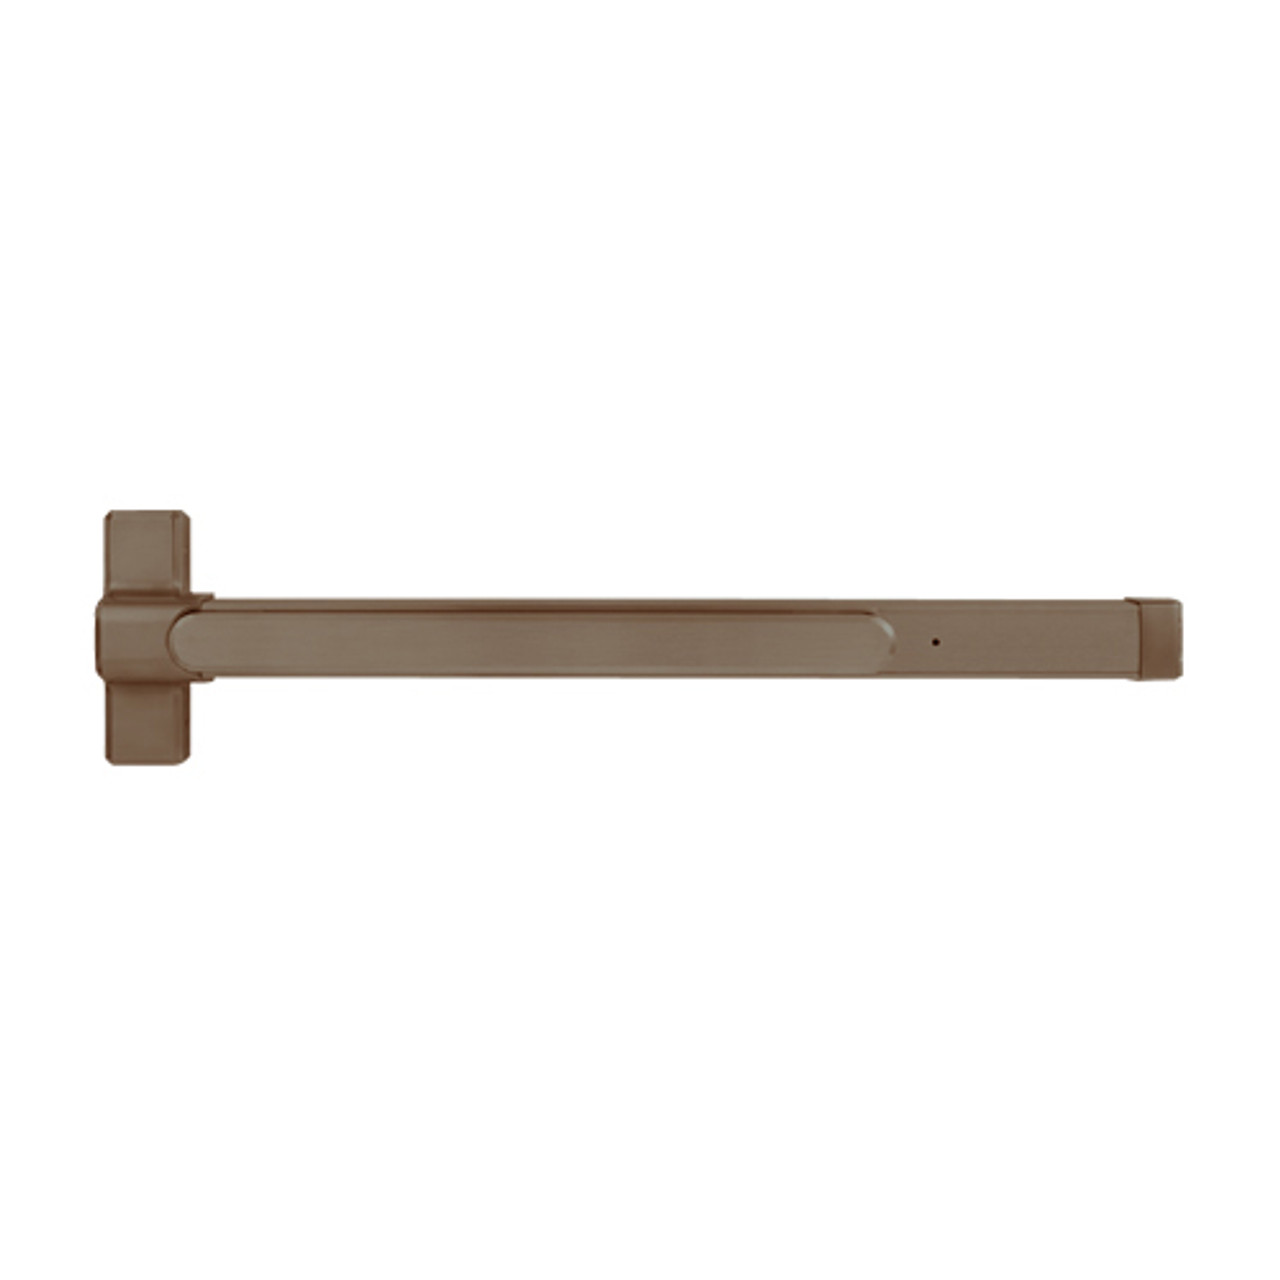 QED117X-36-8-313AN Stanley QED100 Series Heavy Duty Surface Vertical Rod Hex Dog Exit Device in Anodized Duranodic Bronze Finish